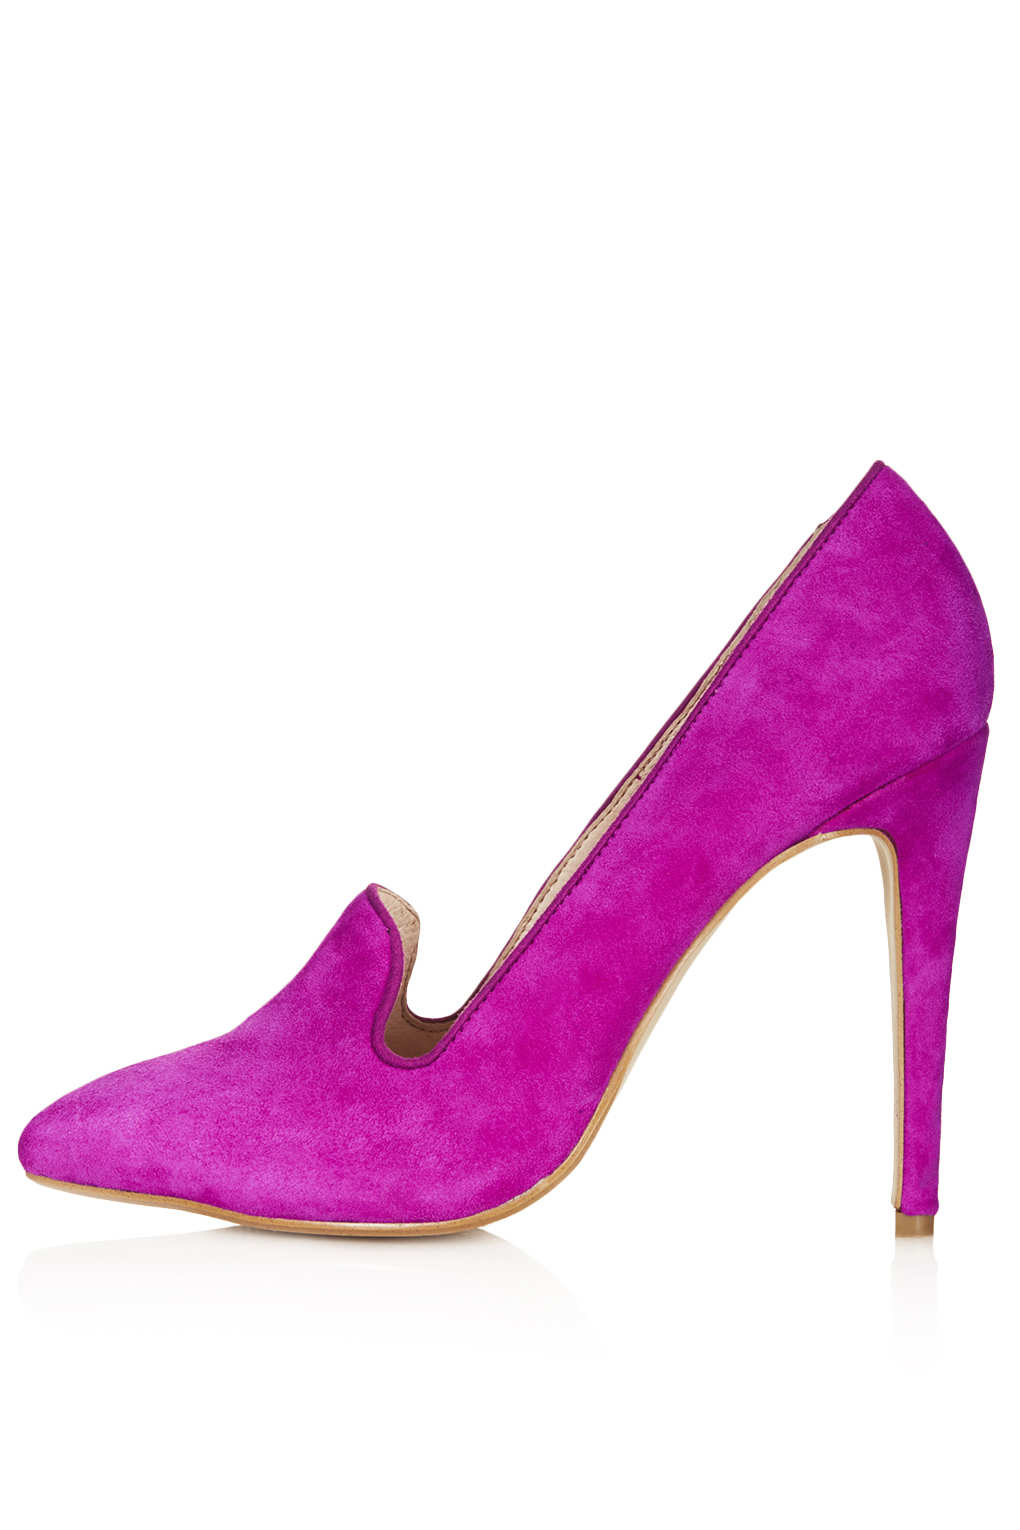 15 Radiant Orchid Items To Buy Right Now